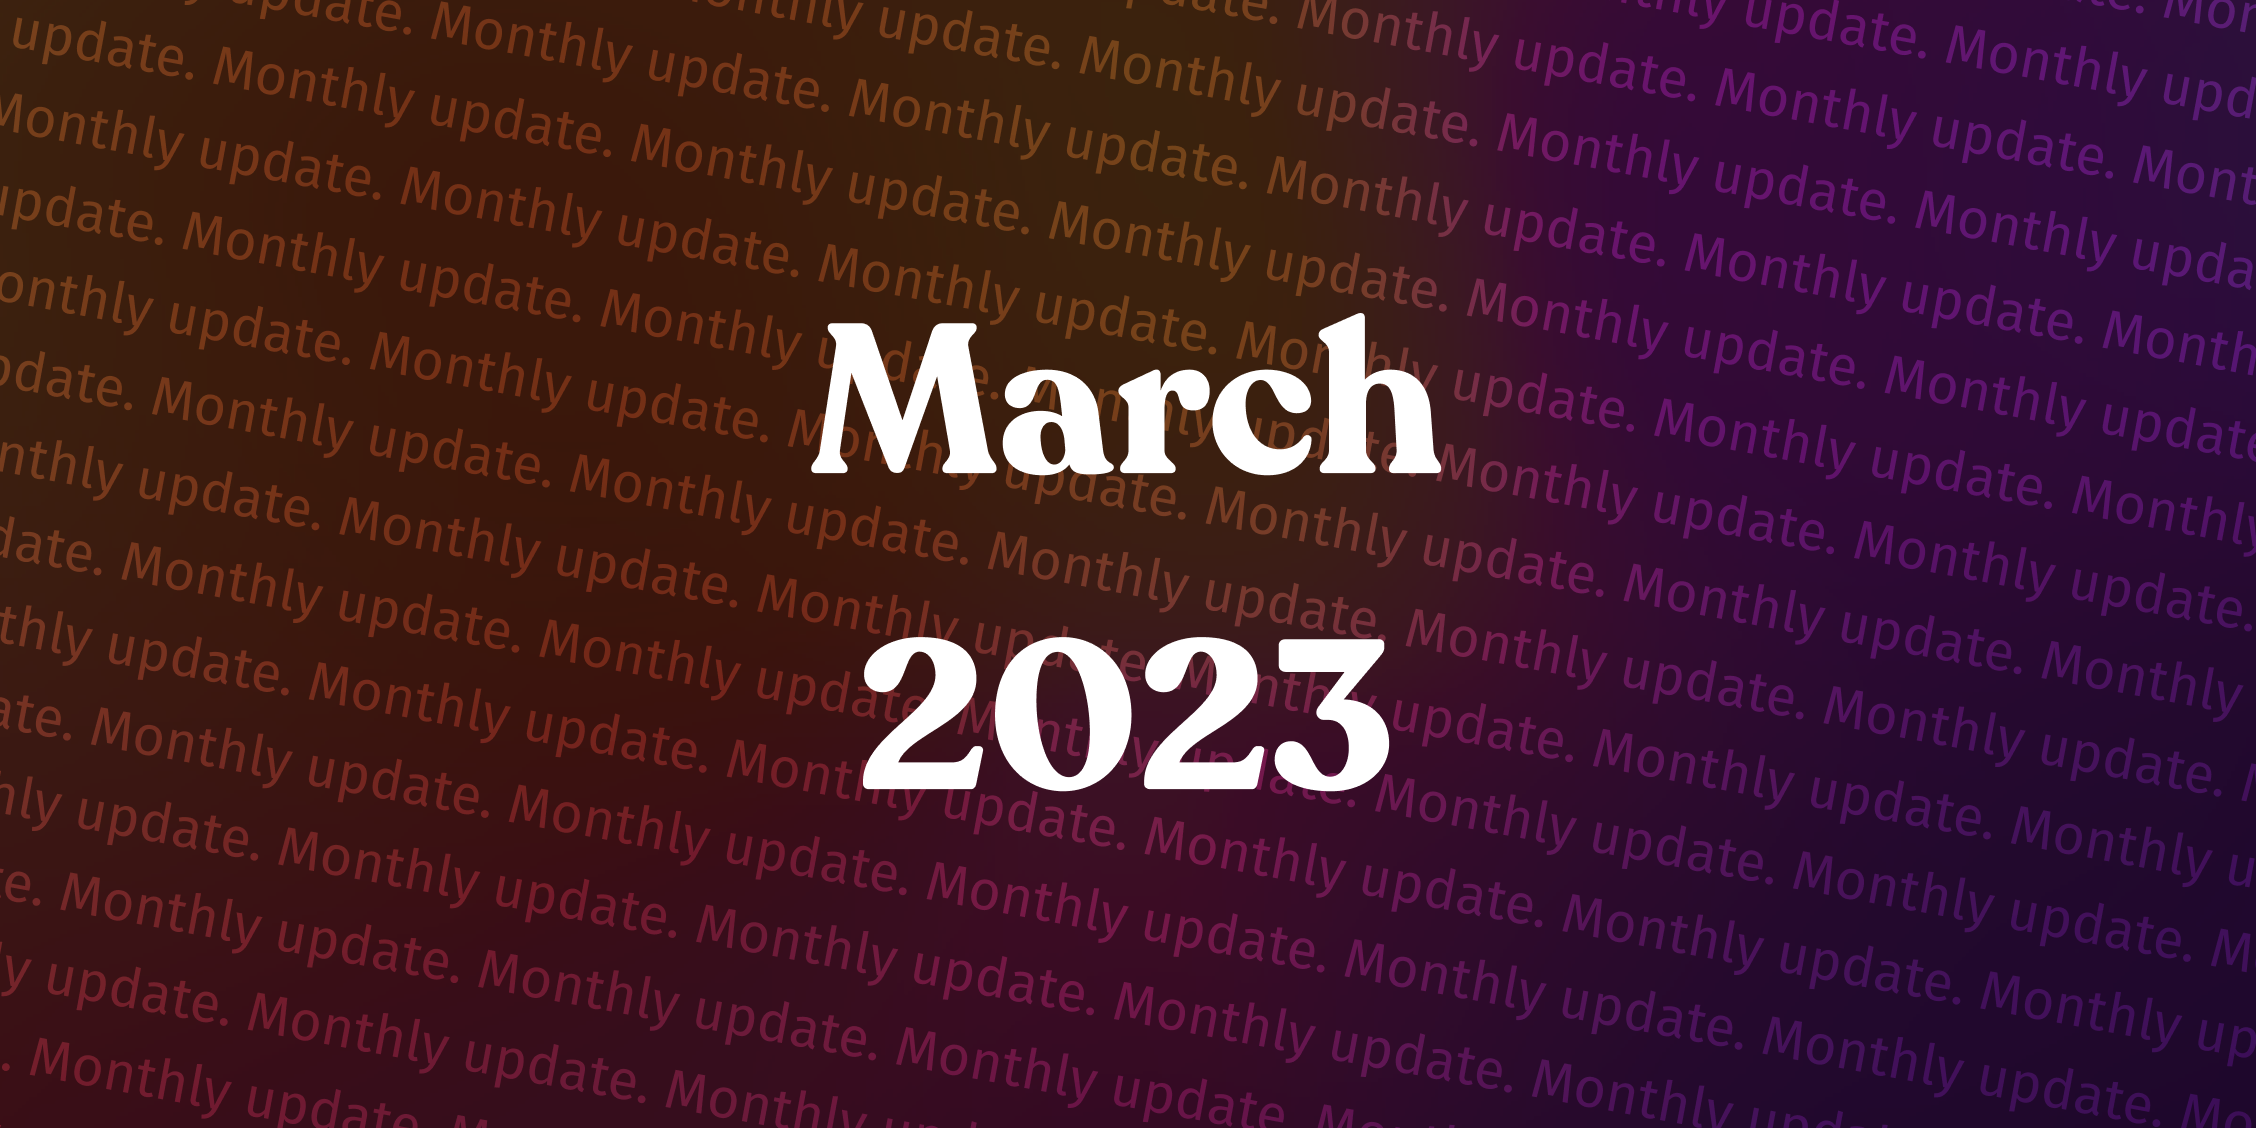 What’s new in Pausly, March 2023